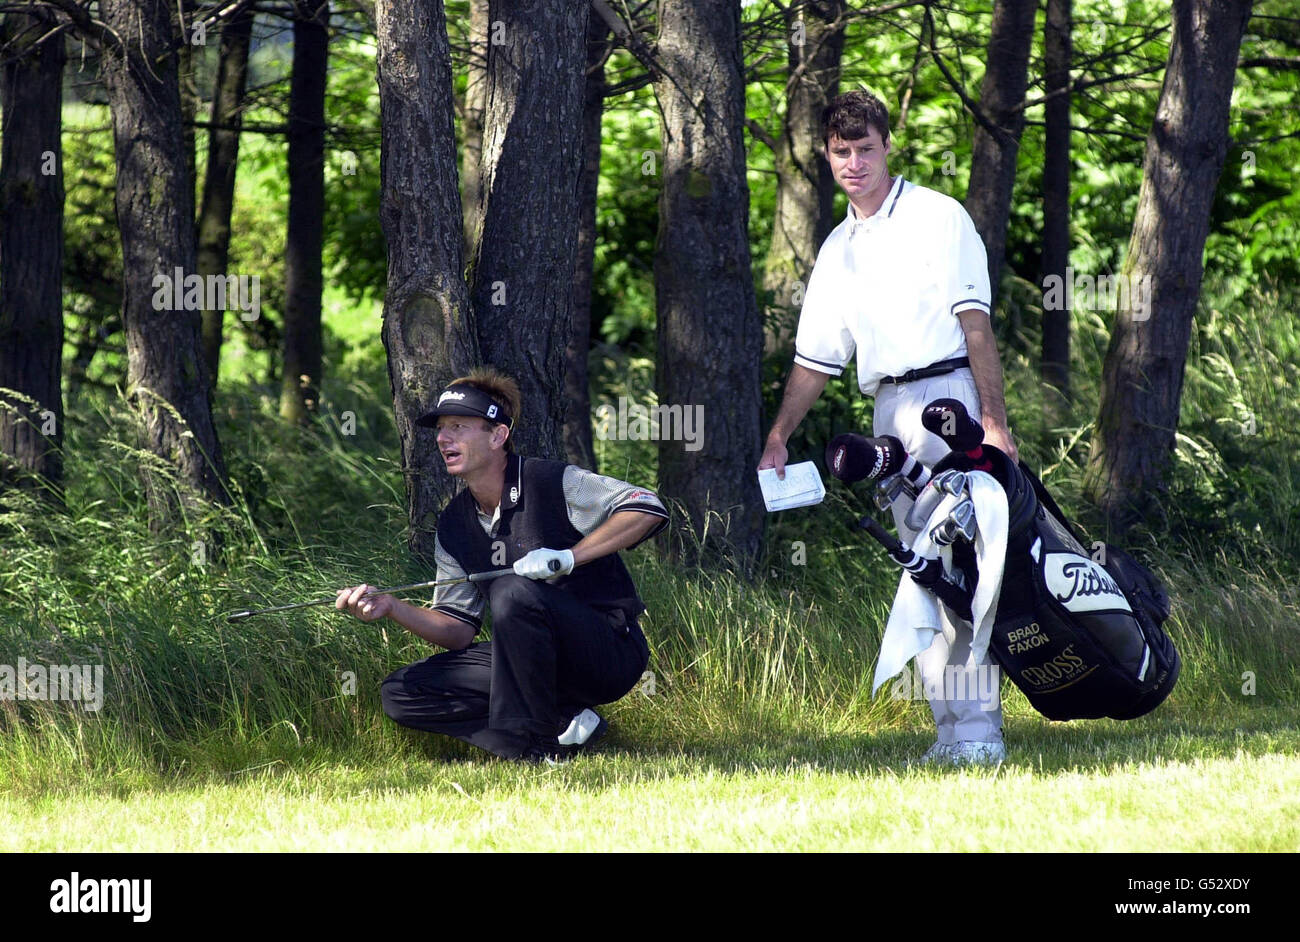 American Ryder Cup golfer Brad Faxon in the rough with his caddie at Lundin Golf Club, near St. Andrews, Scotland. Faxon is playing in the 129th Open Golf Tornament pre-qualifying competition. Stock Photo